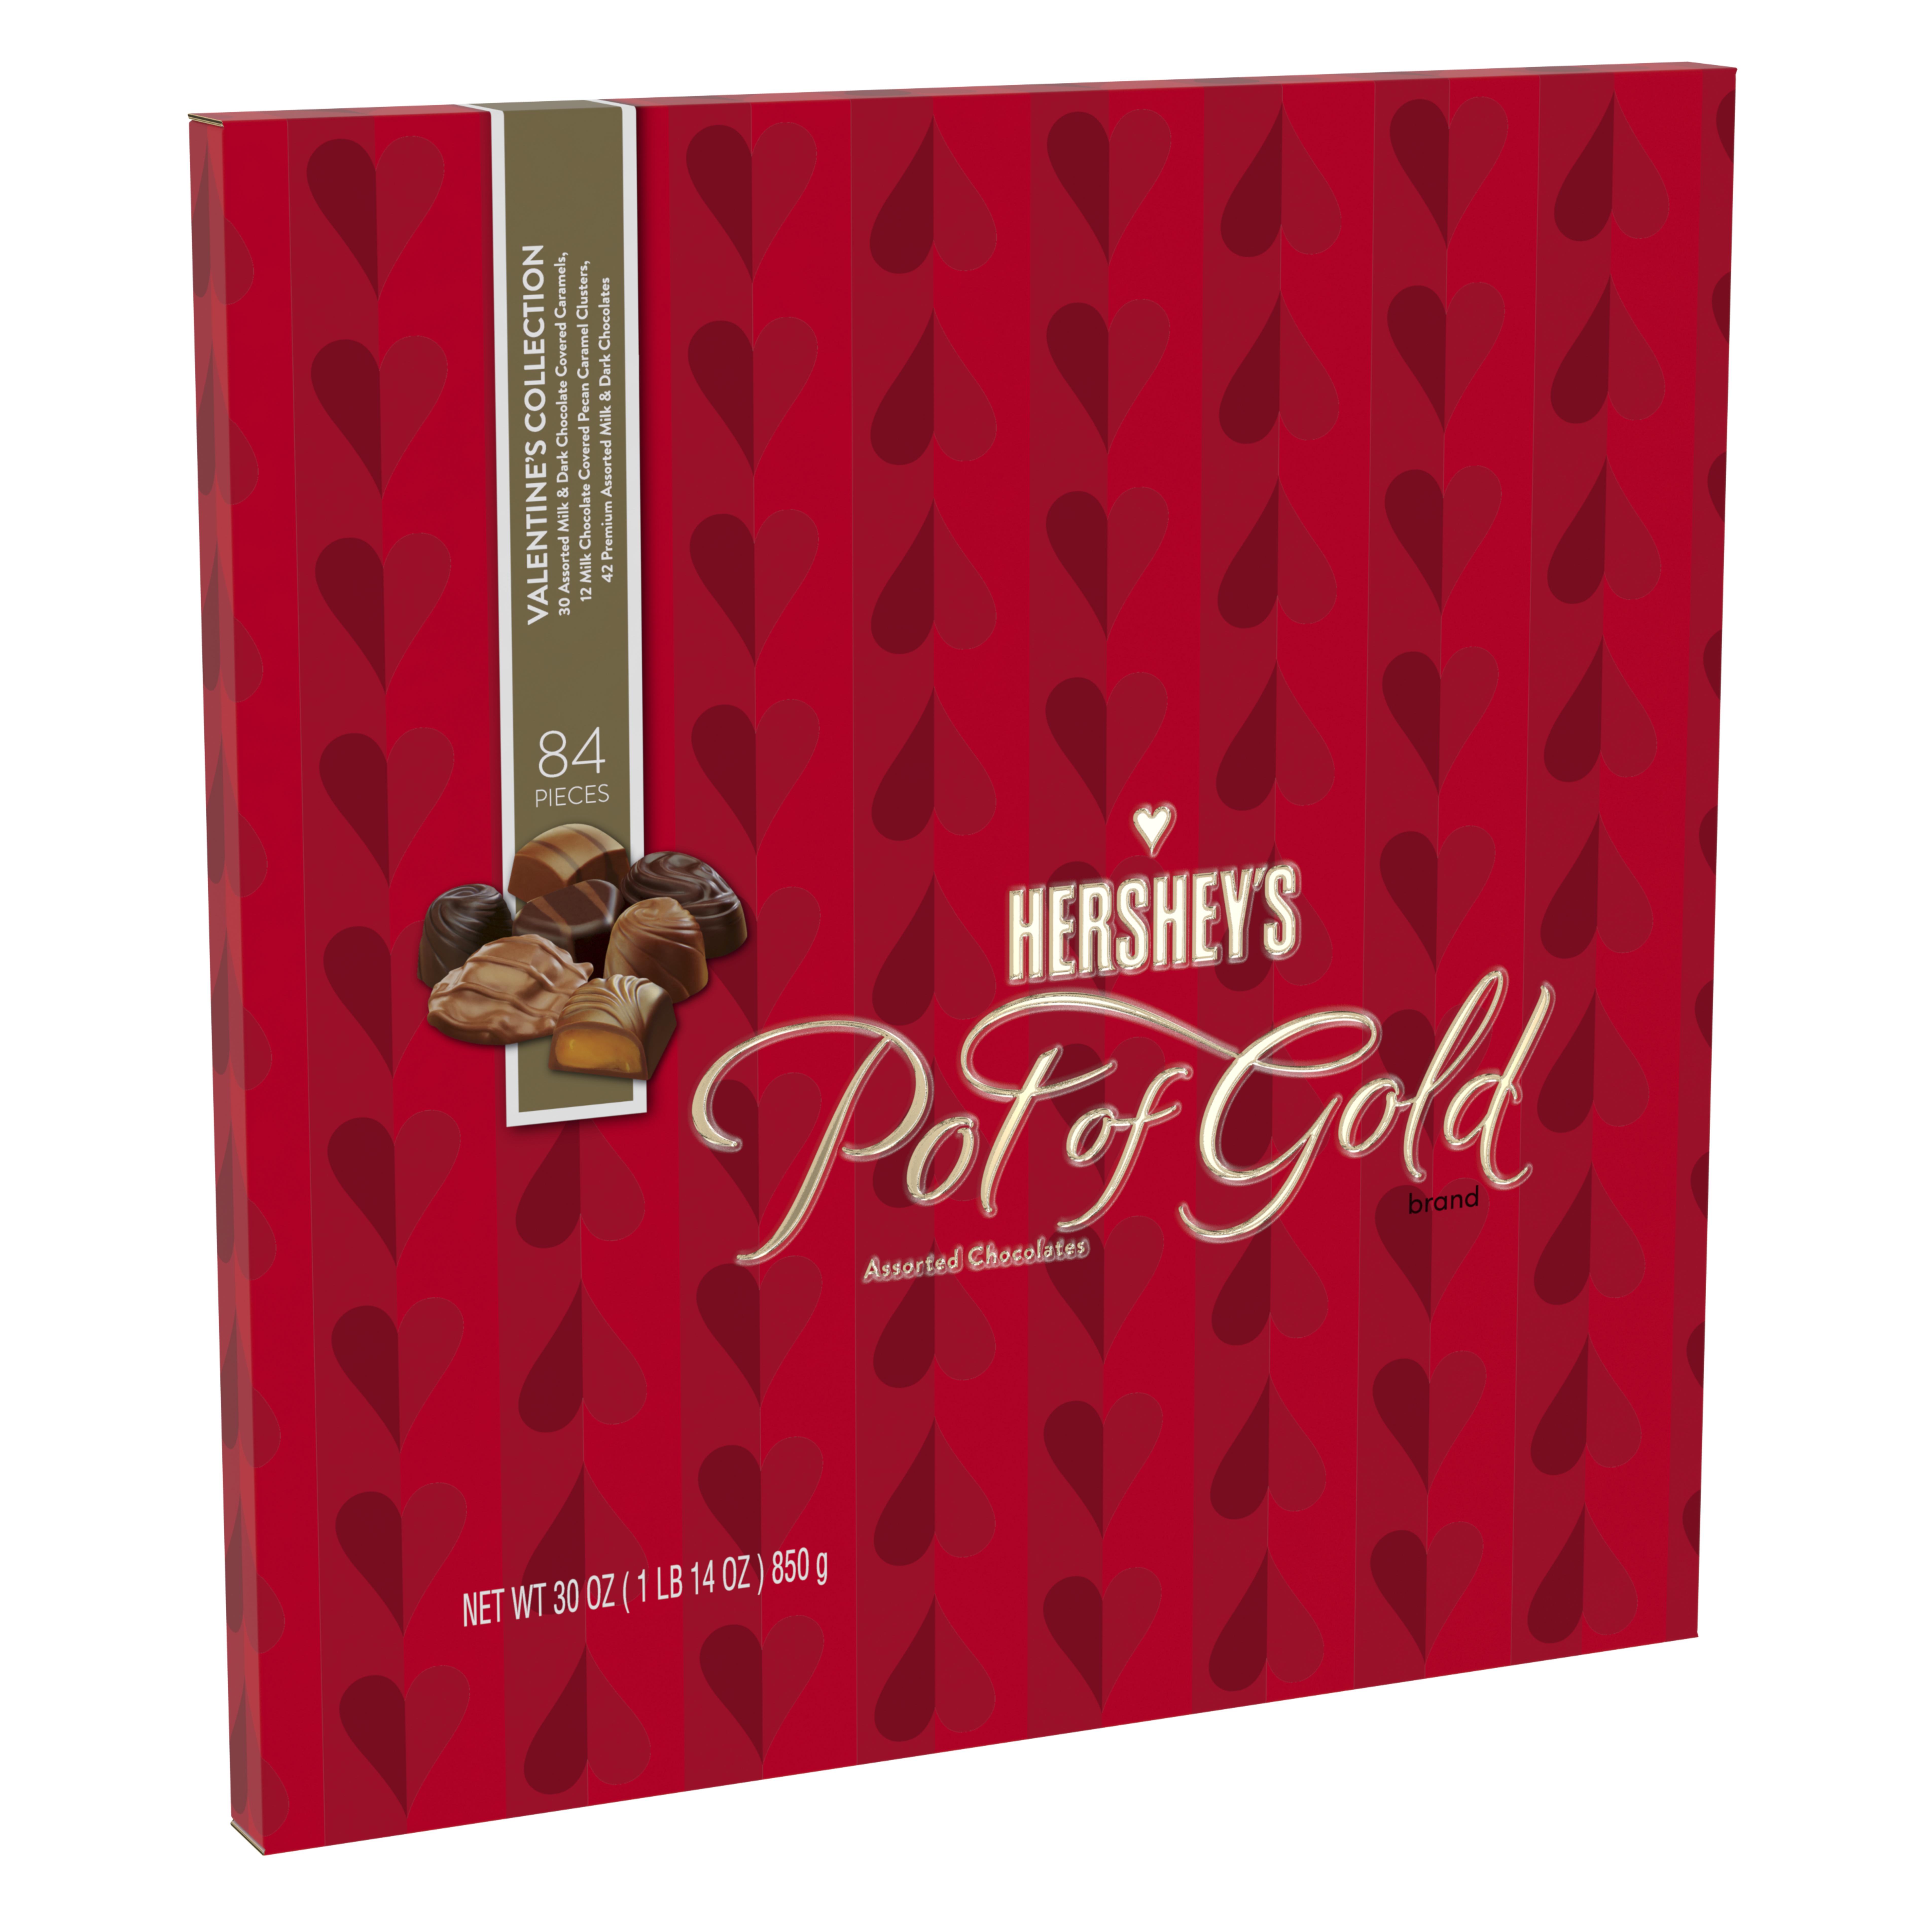 HERSHEY'S, POT OF GOLD, Valentine's Collection Milk Chocolate Assortment Candy, Valentine's Day, 30 Oz., Gift Box - image 1 of 5